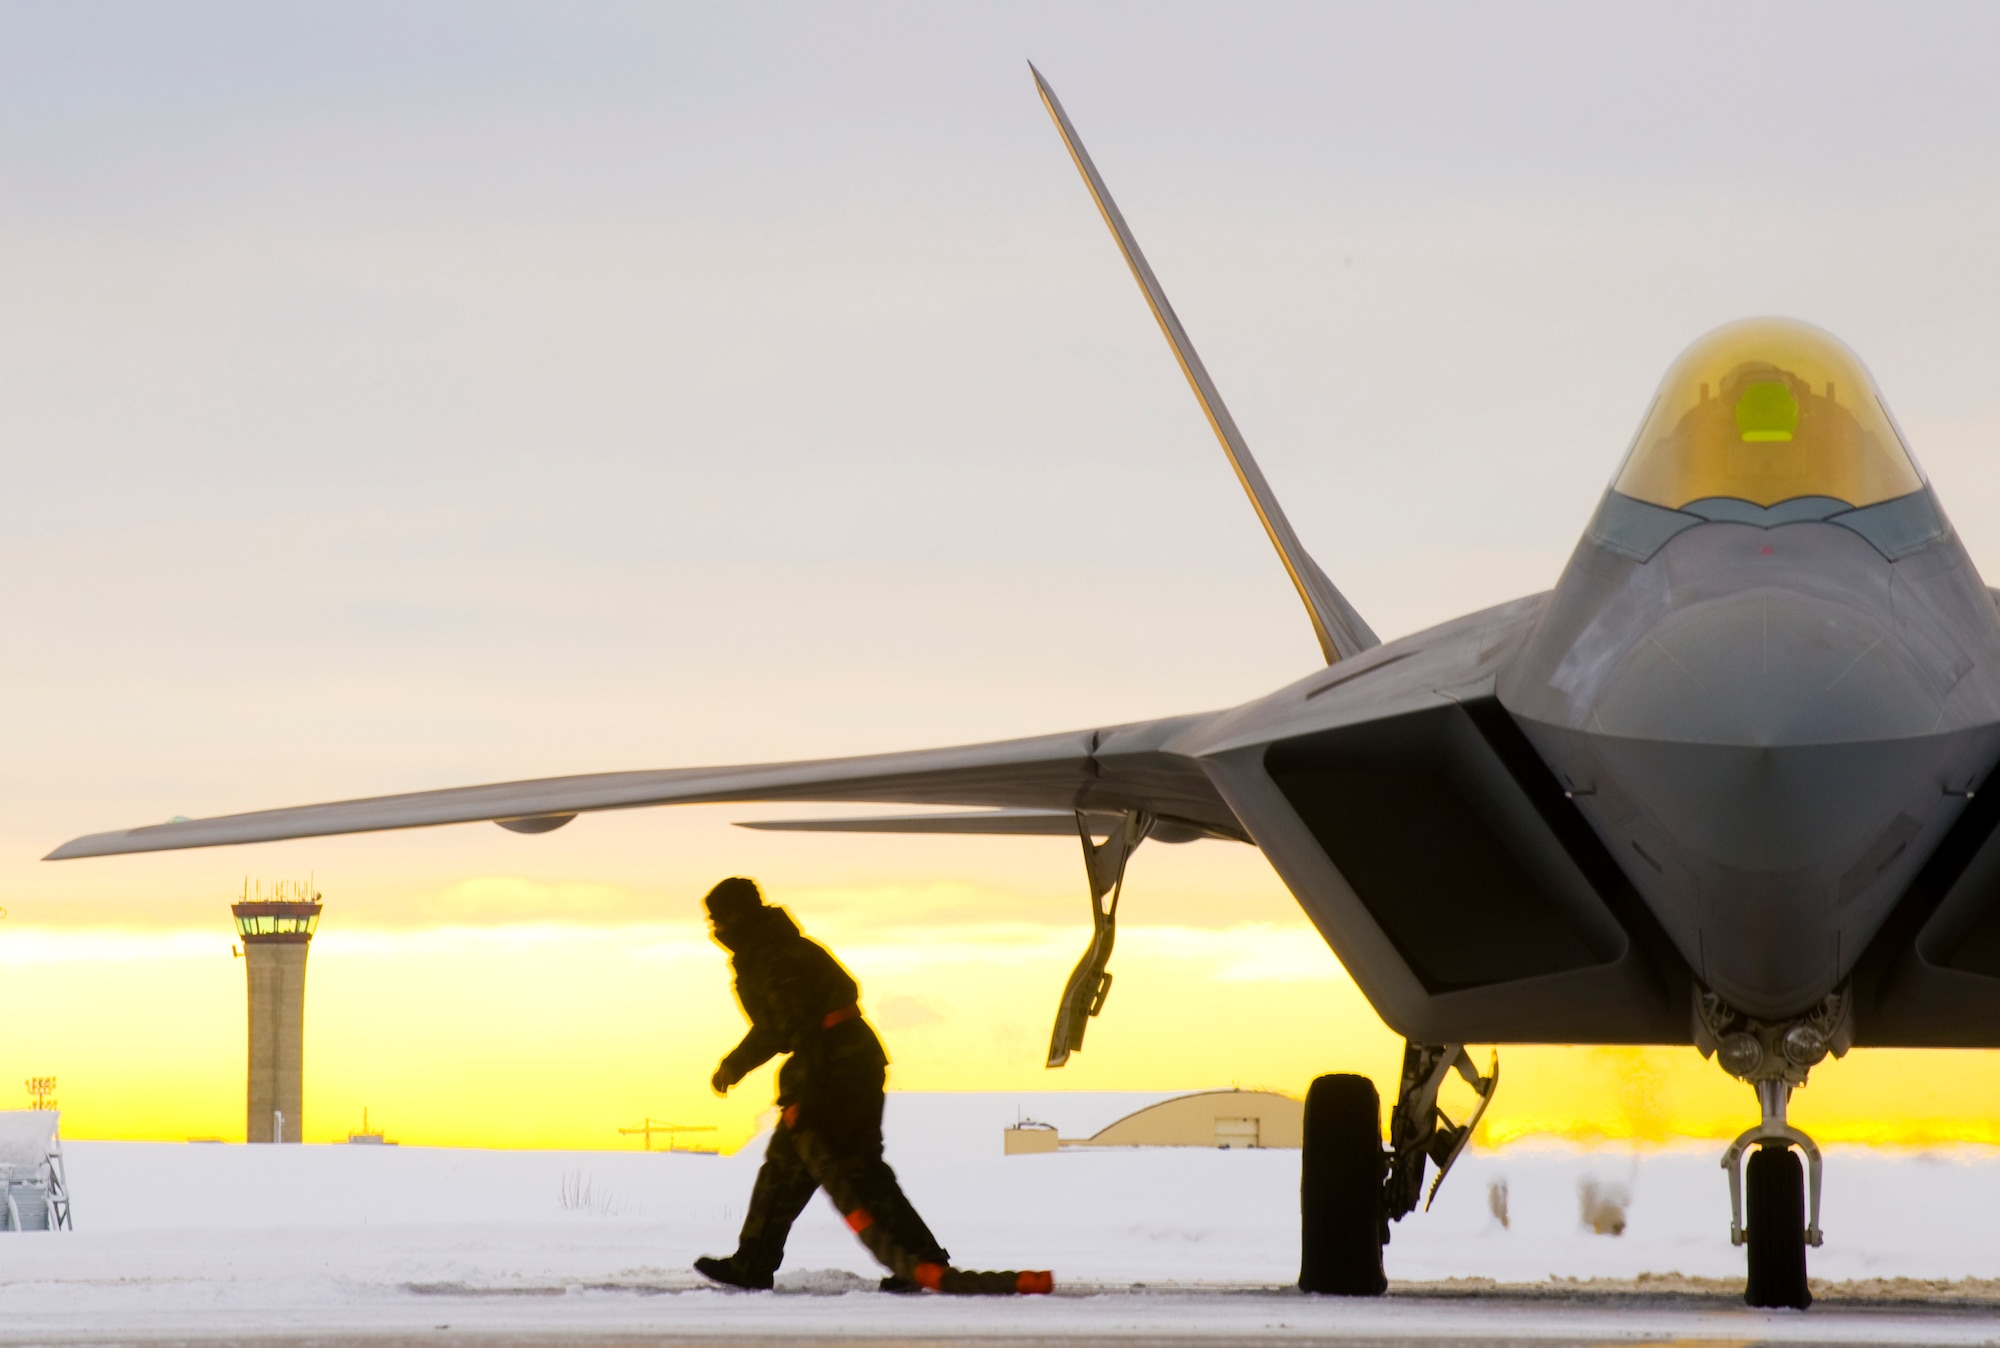 ELMENDORF AIR FORCE BASE, Alaska - A 90th Aircraft Maintenance Unit crew chief pulls the chocks from an F-22A Raptor laden with concrete bombs before departing for a training mission. For the first time at Elmendorf, a mock bomb drop over Alaska Jan. 16 provides integral training for both fighters and maintainers in preparation to declare its initial operation capabilities. (U.S. Air Force photo/Senior Airman Garrett Hothan)